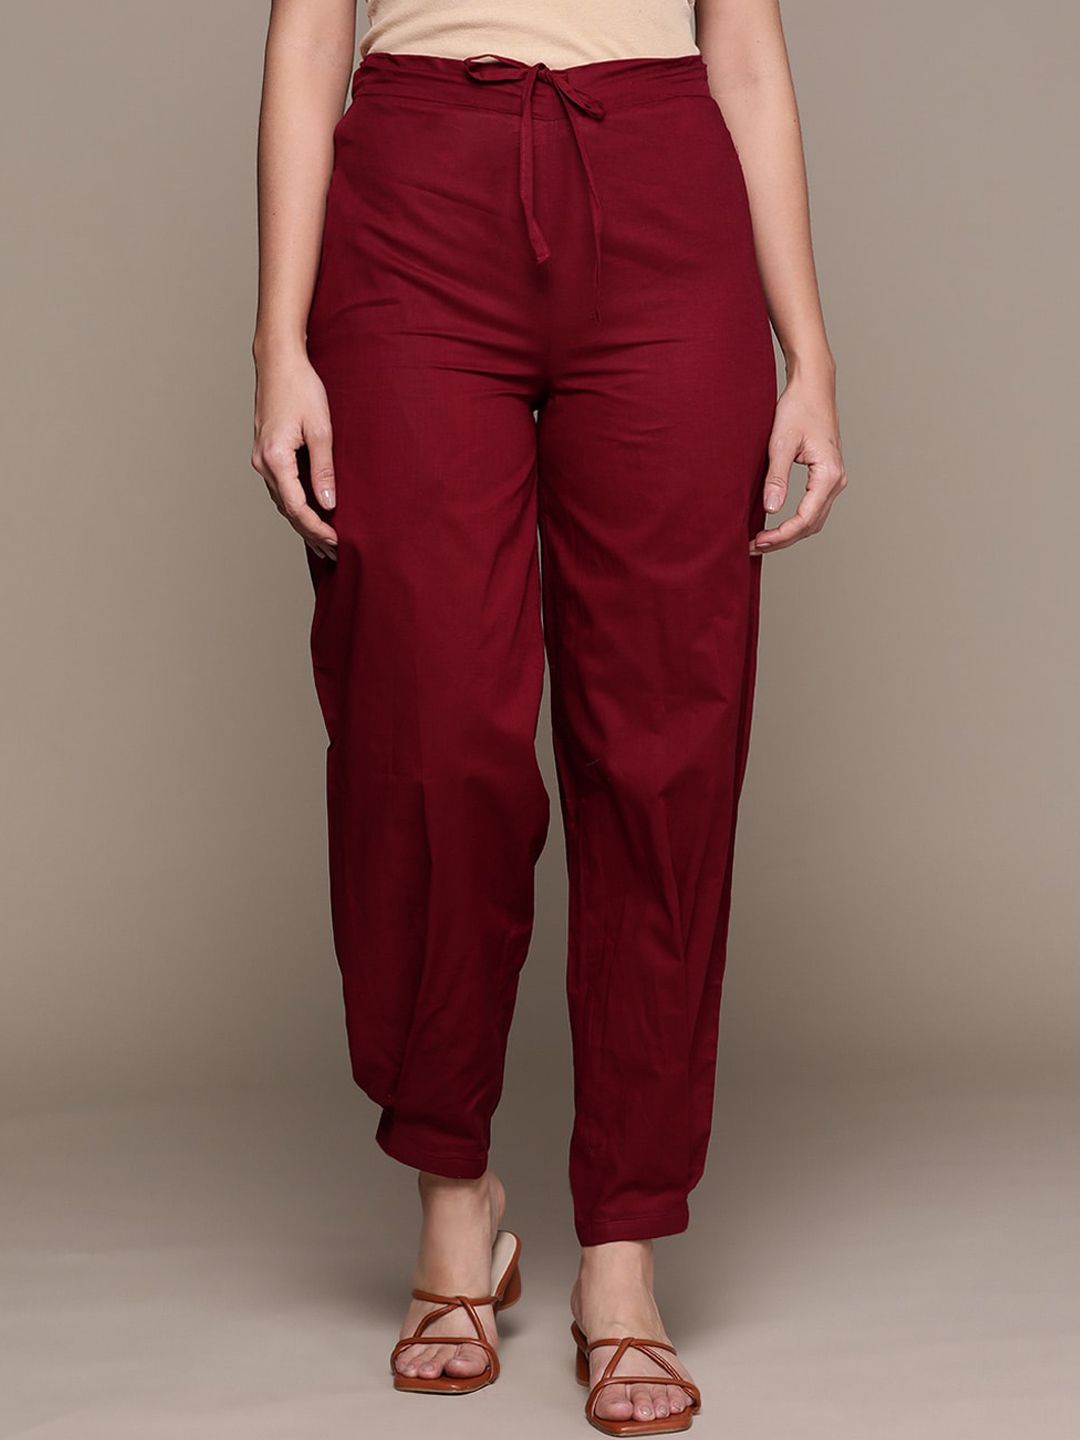 MBeautiful Women Maroon Mid-Rise Cotton Trousers Price in India